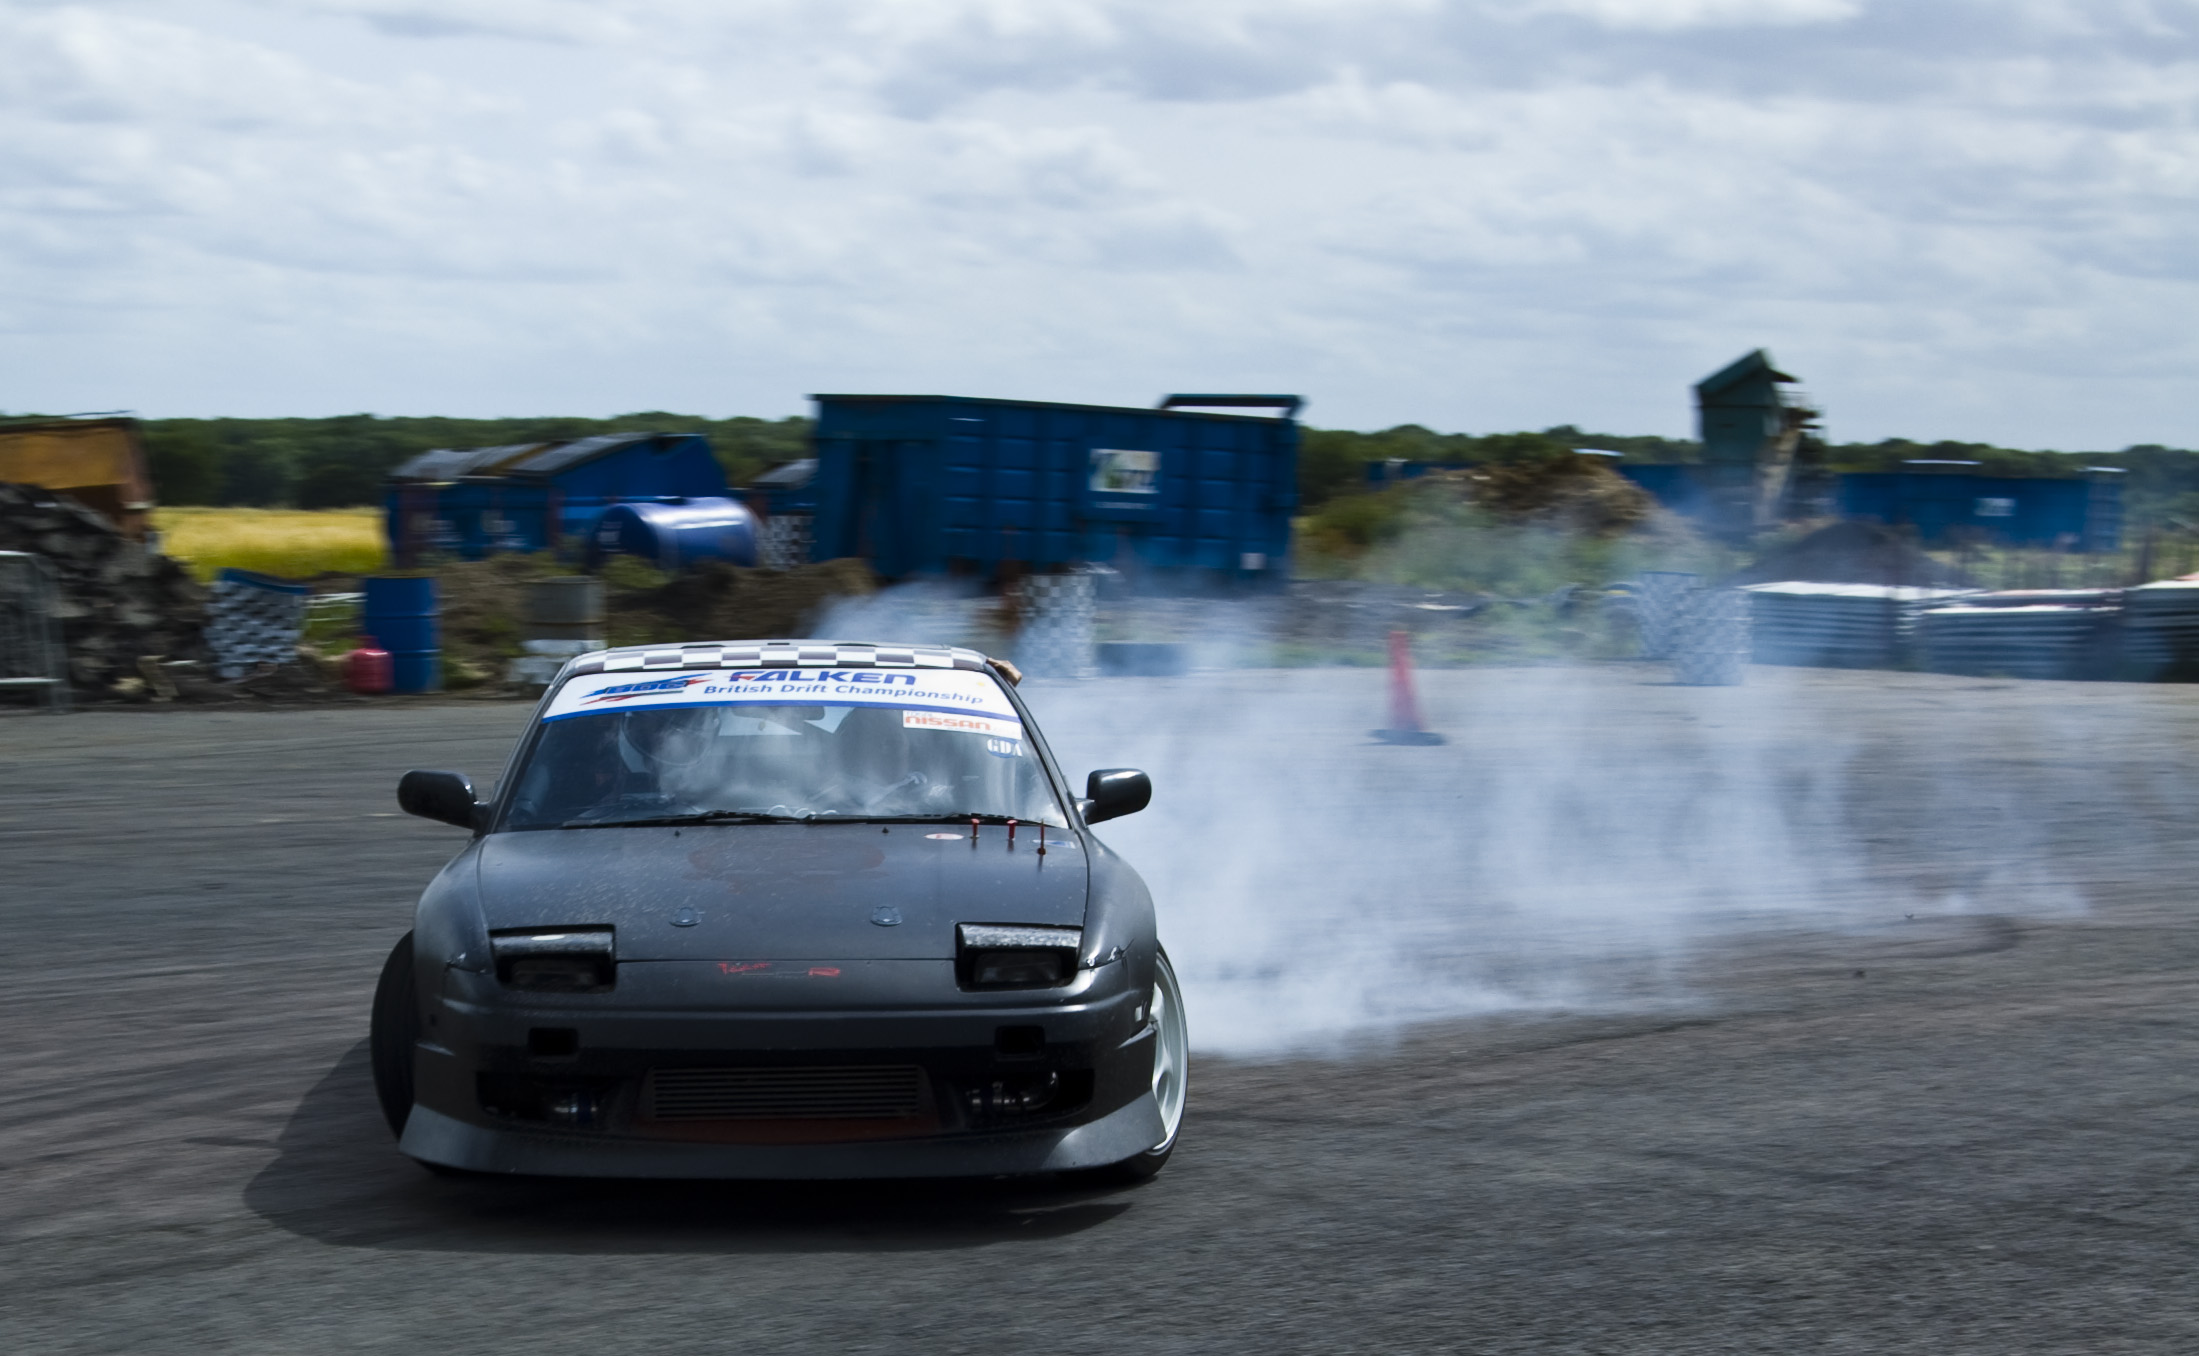 S13 Wallpaper Submited Image